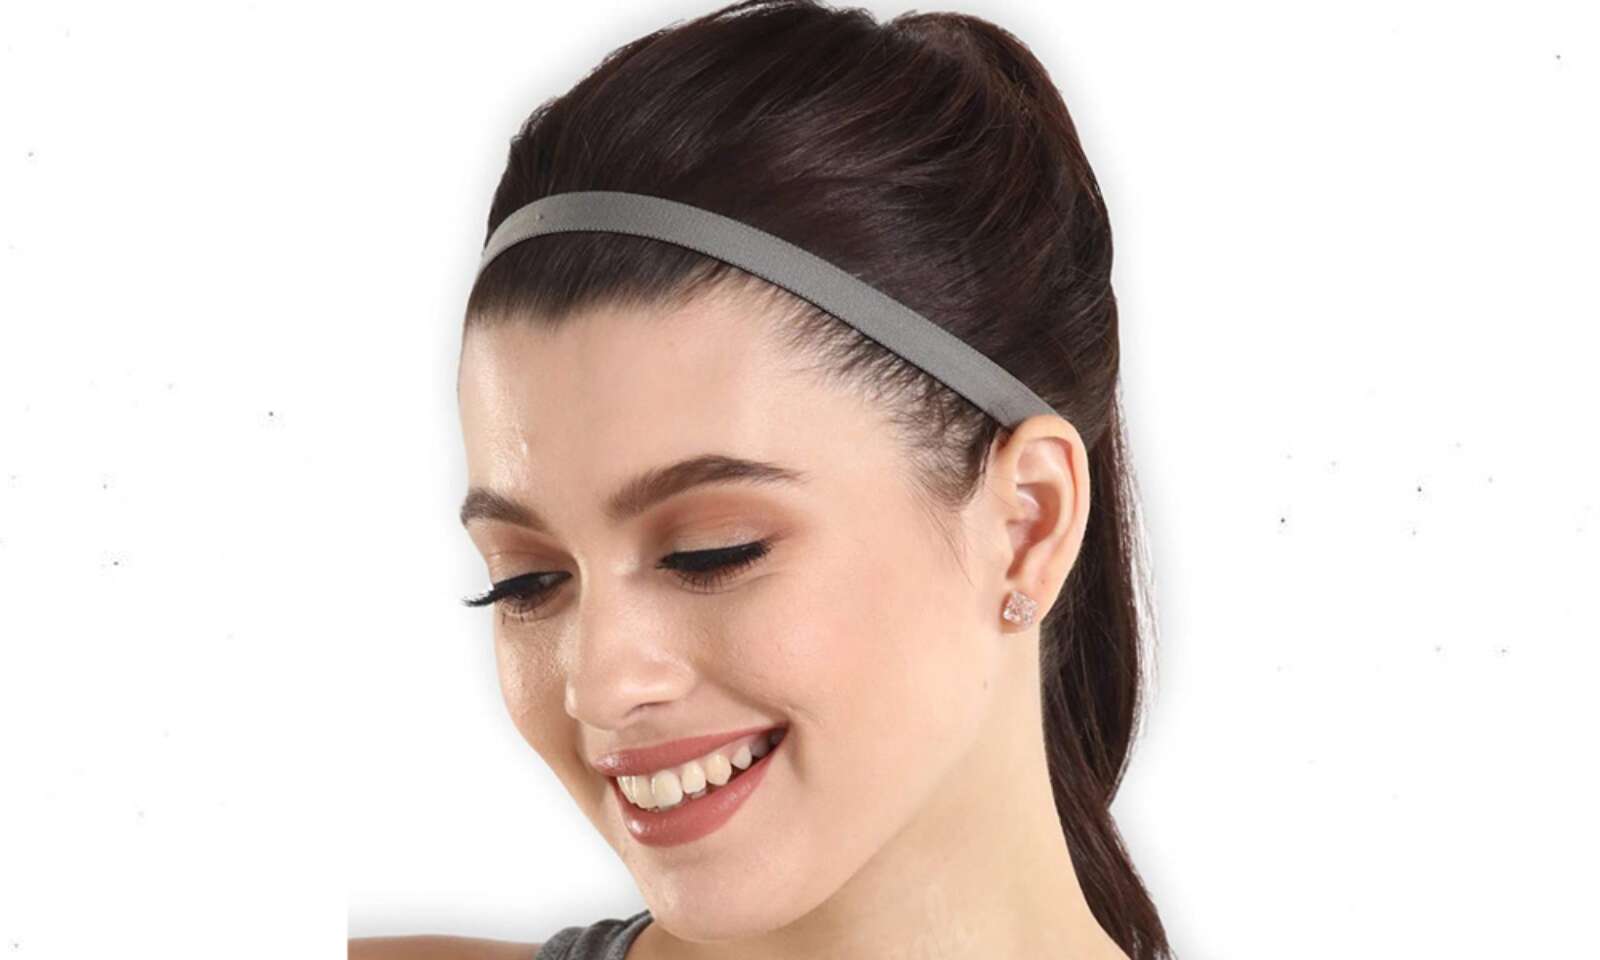 Thin hair bands became fashion for work from home